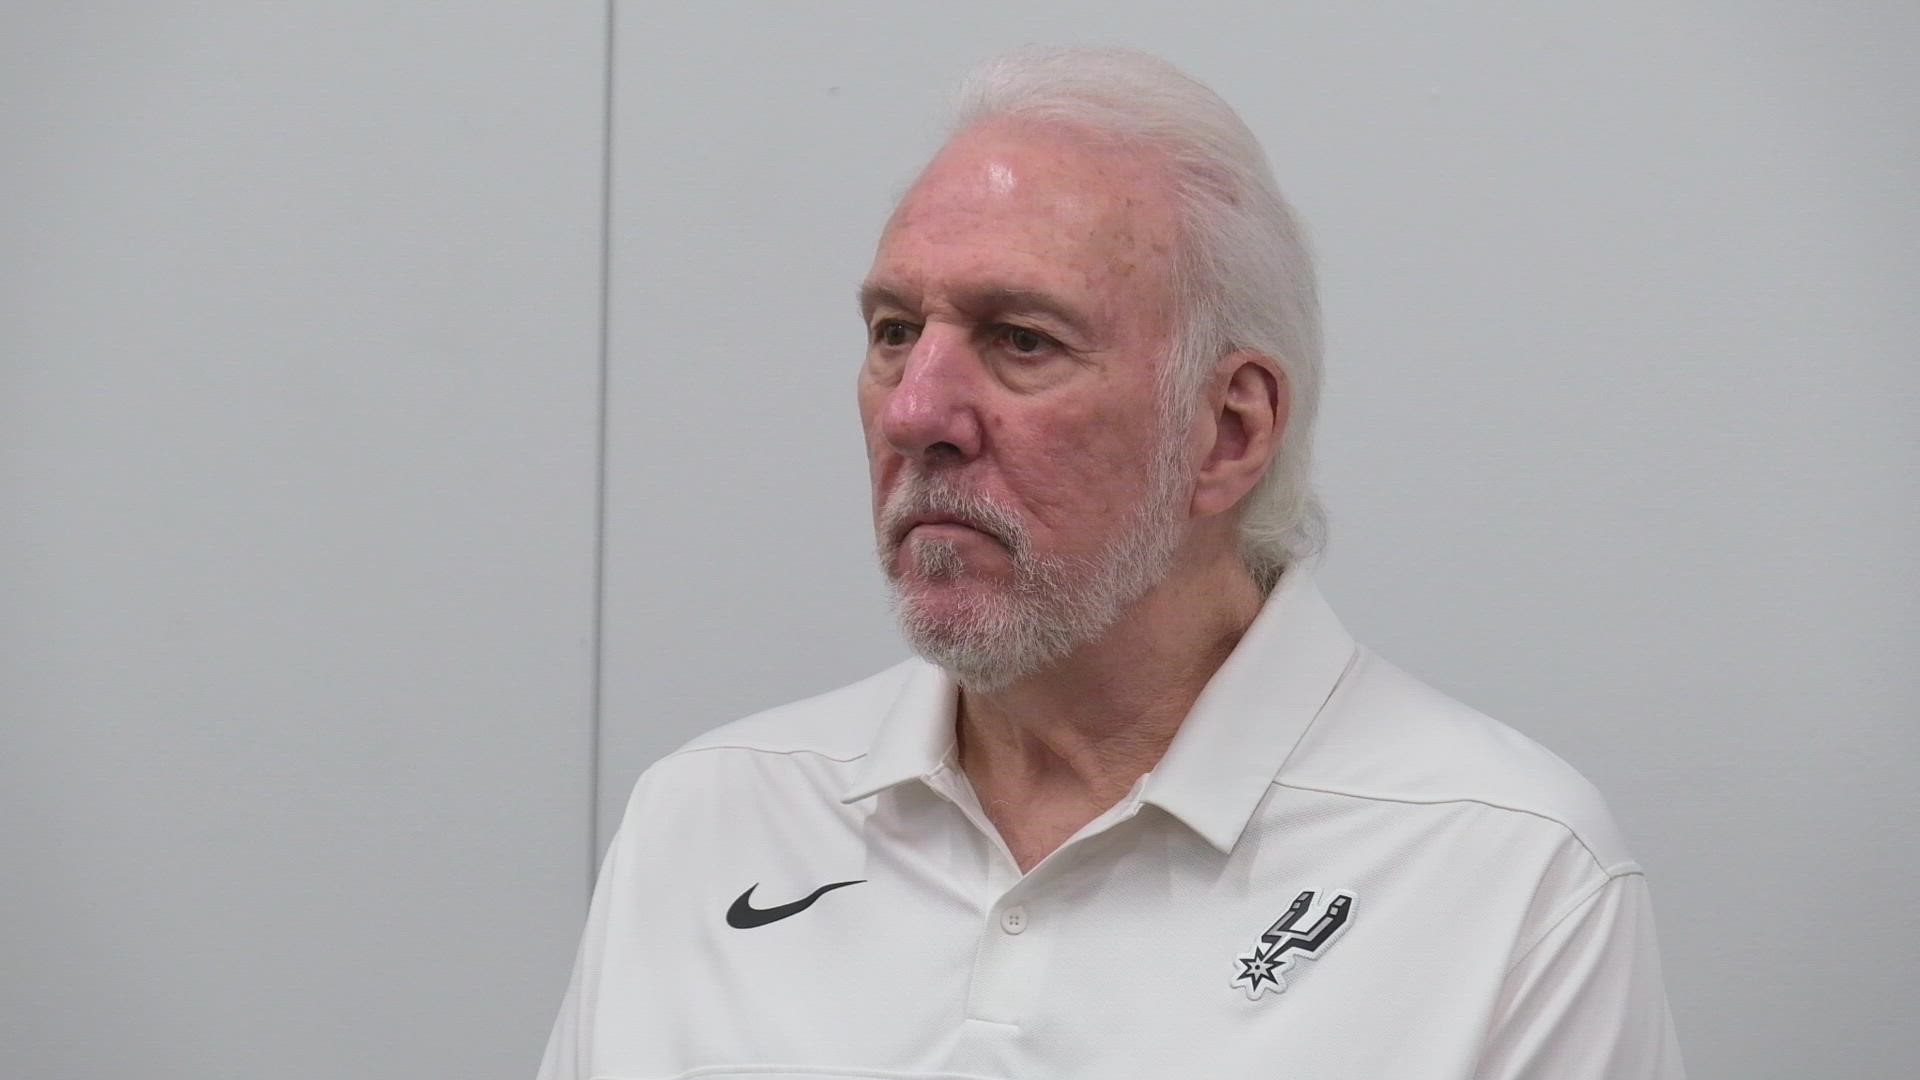 Before the Spurs took on the Suns, Gregg Popovich riffed on his relationship with Tony Parker and the stress of coaching Team USA.